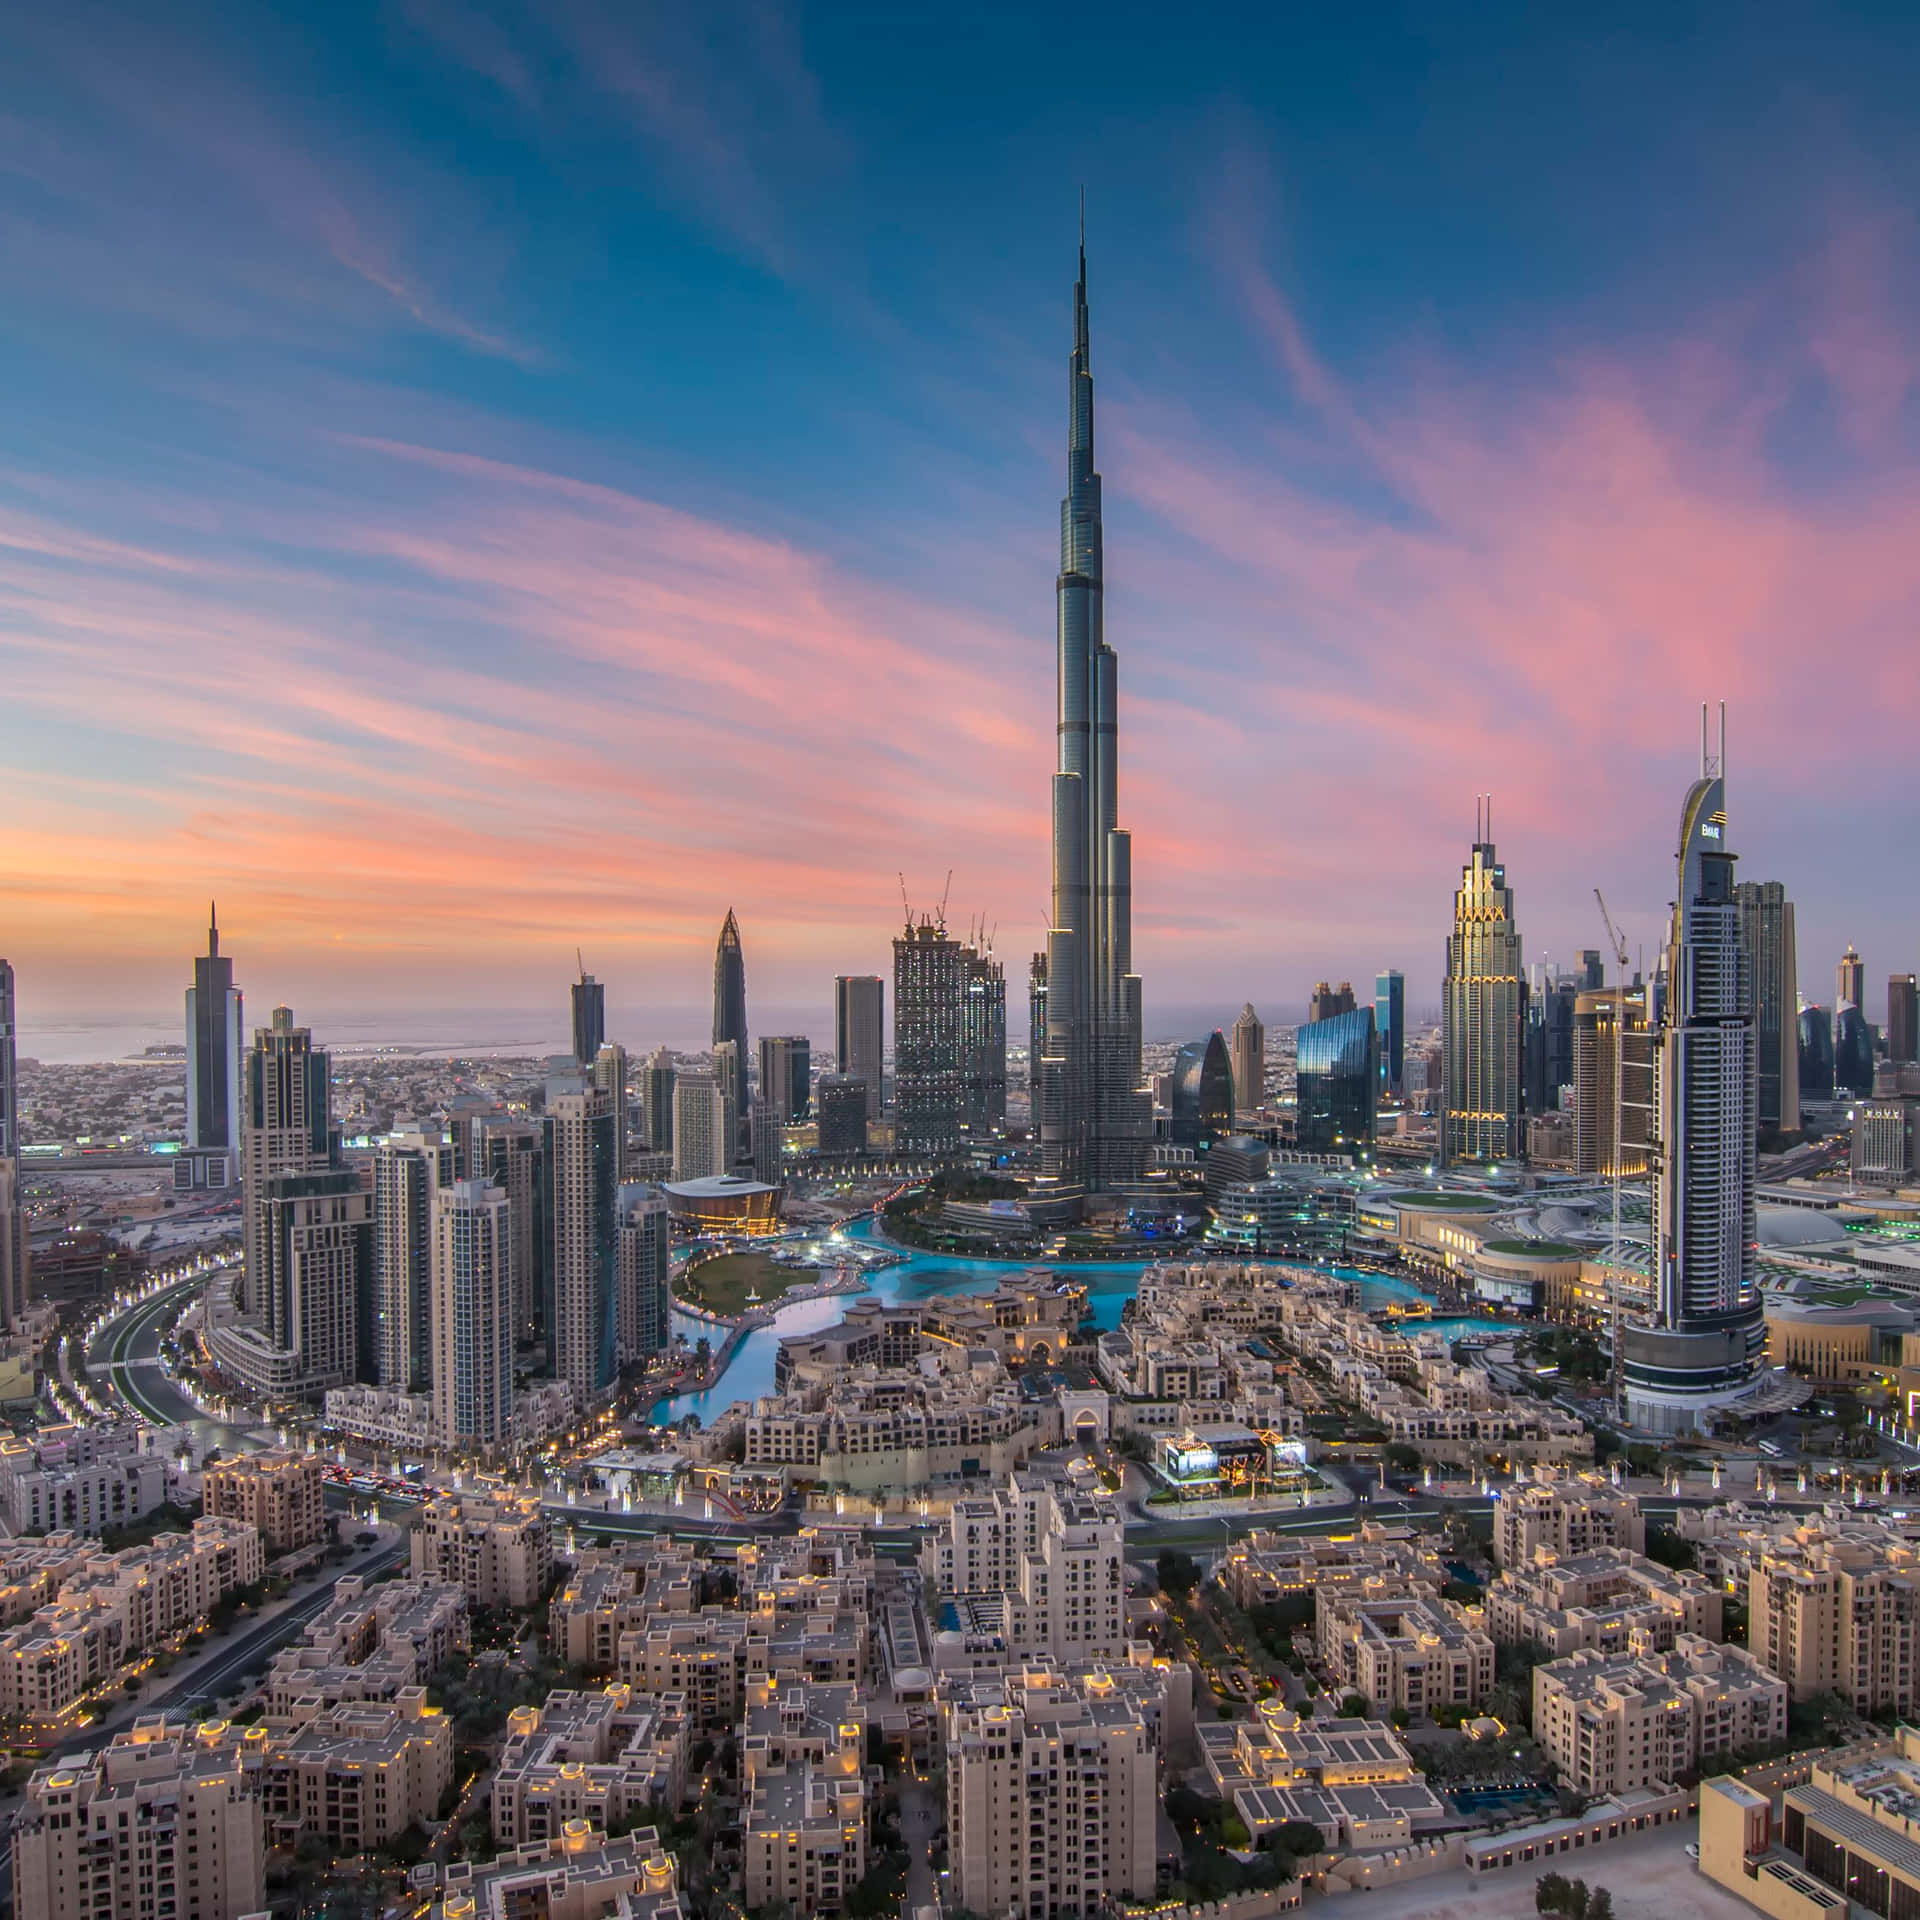 The beautiful skyline of Dubai strikingly stands out against the surrounding desert.